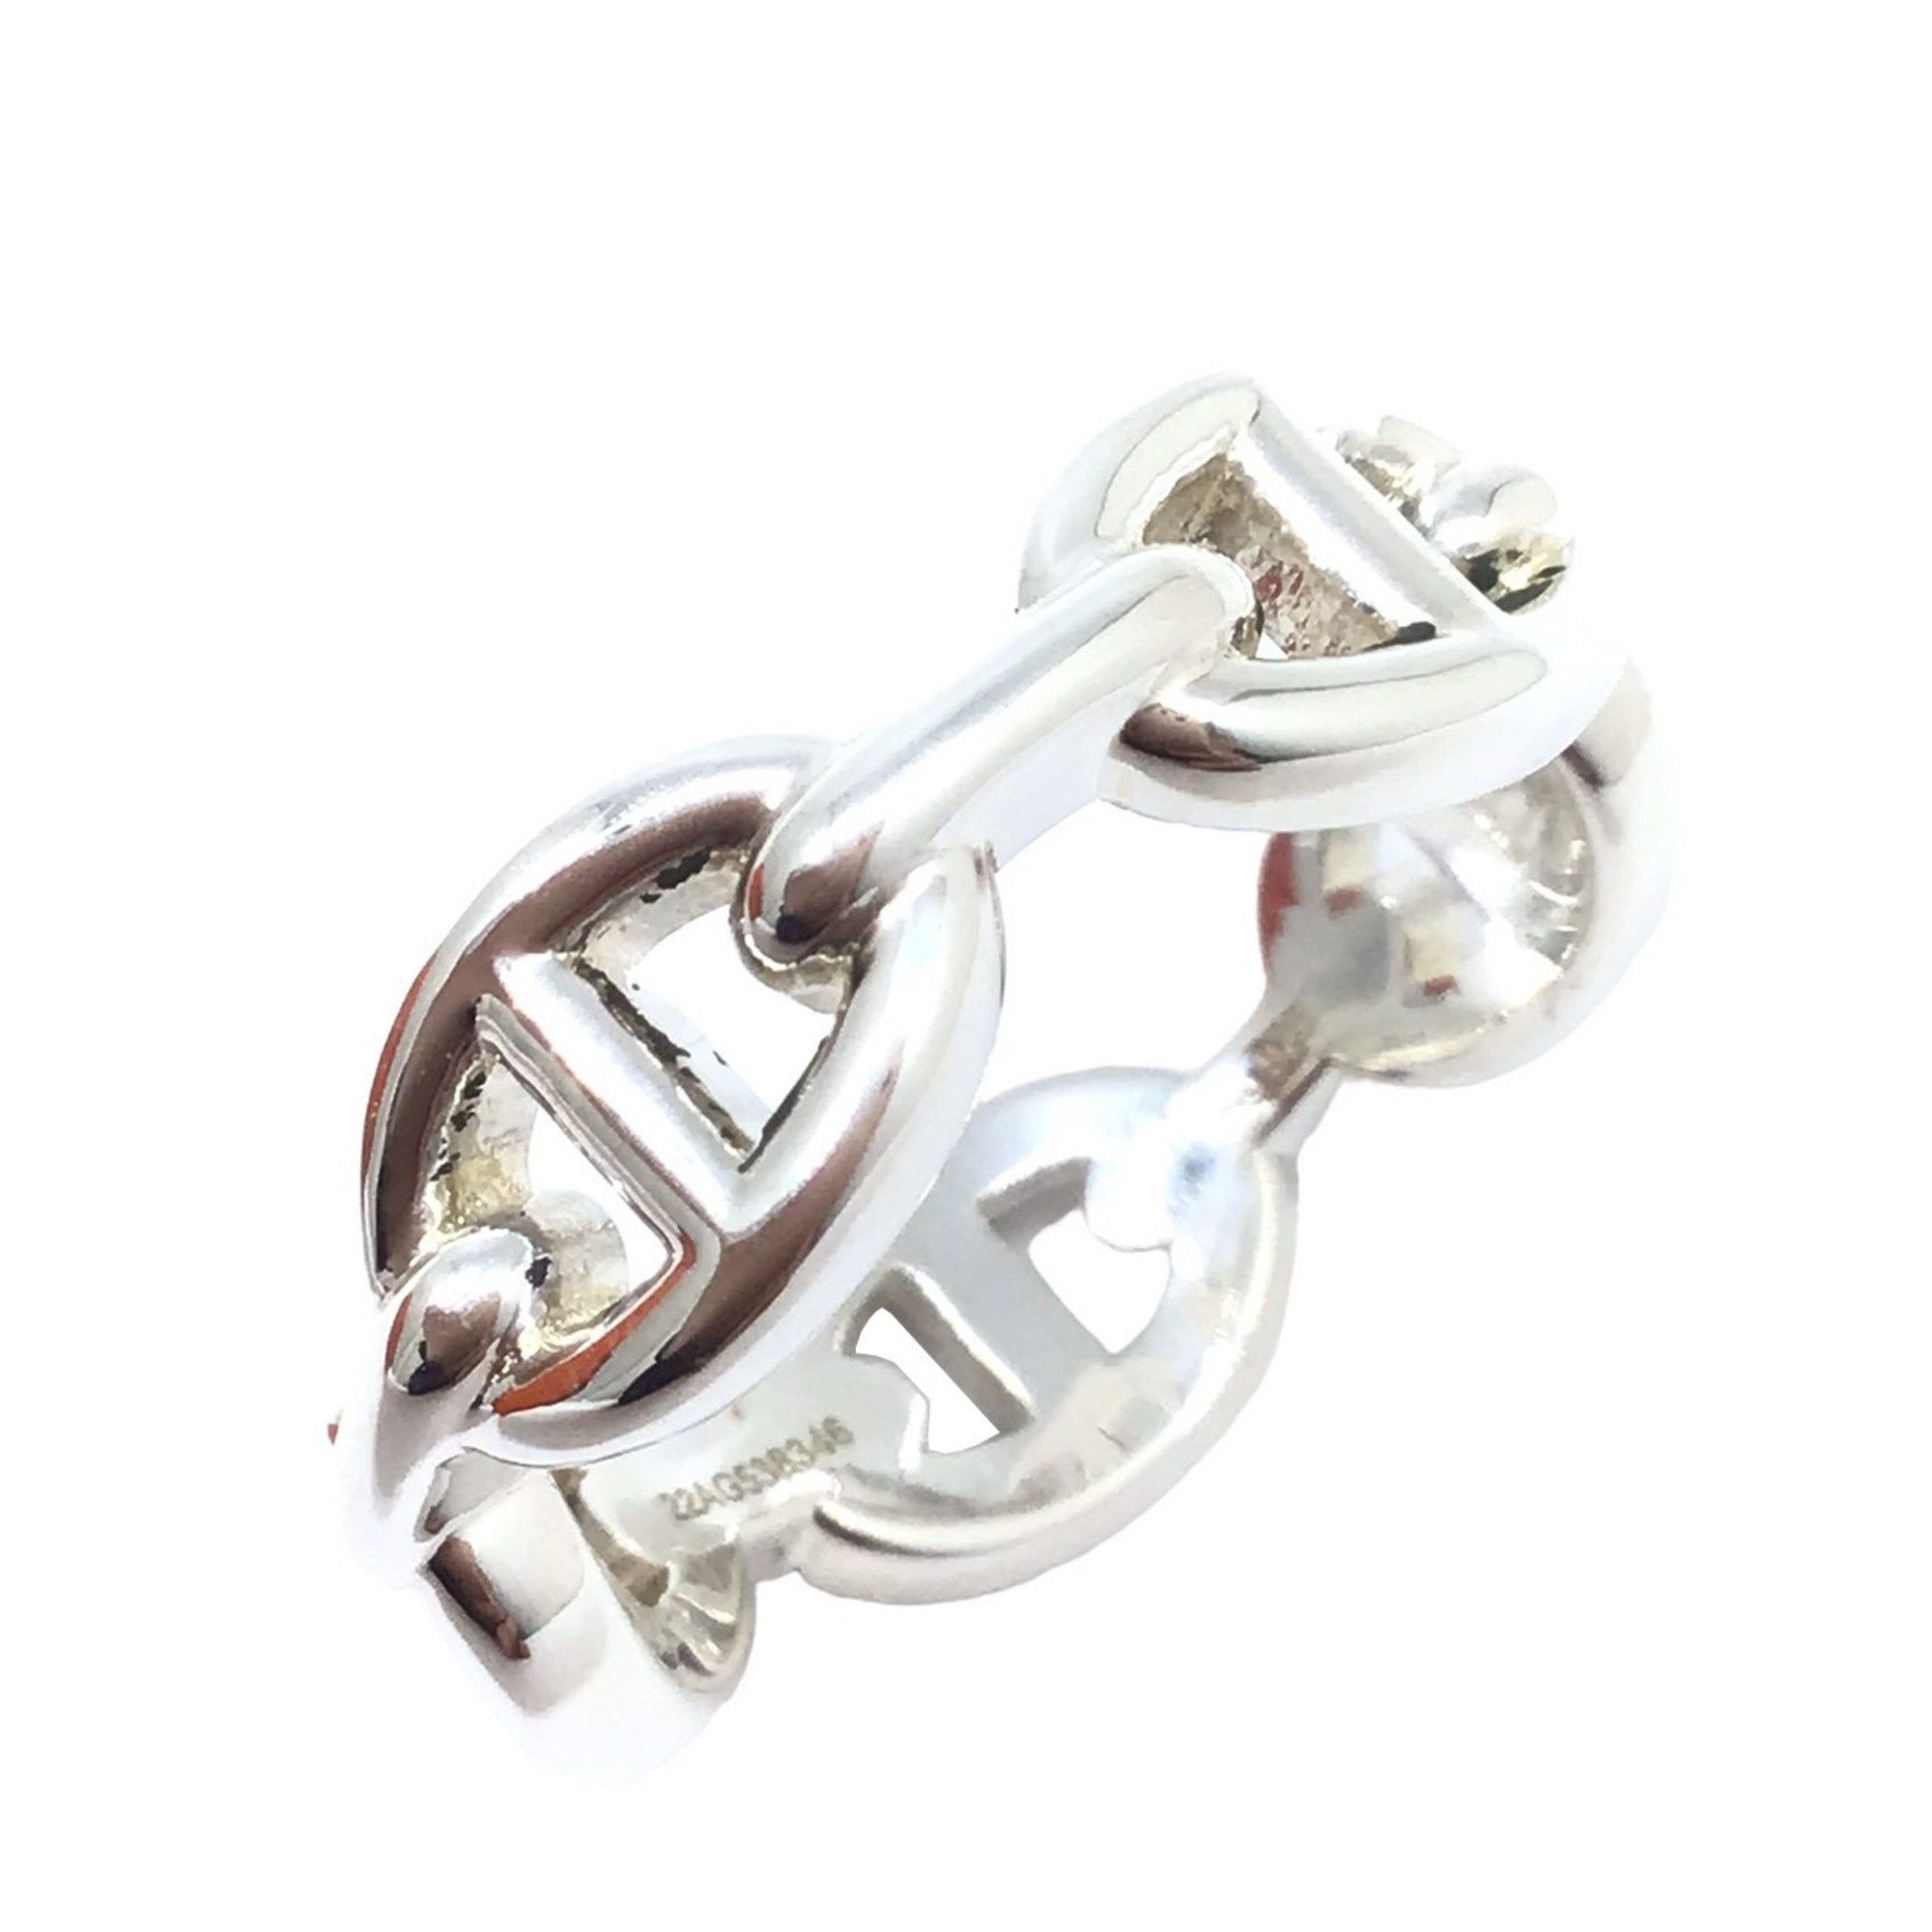 image of Hermes Ancienne Pm 55 Ring Silver Ag925 Sv925 Chaine D'acle Accessory Small Items Women Men Unisex